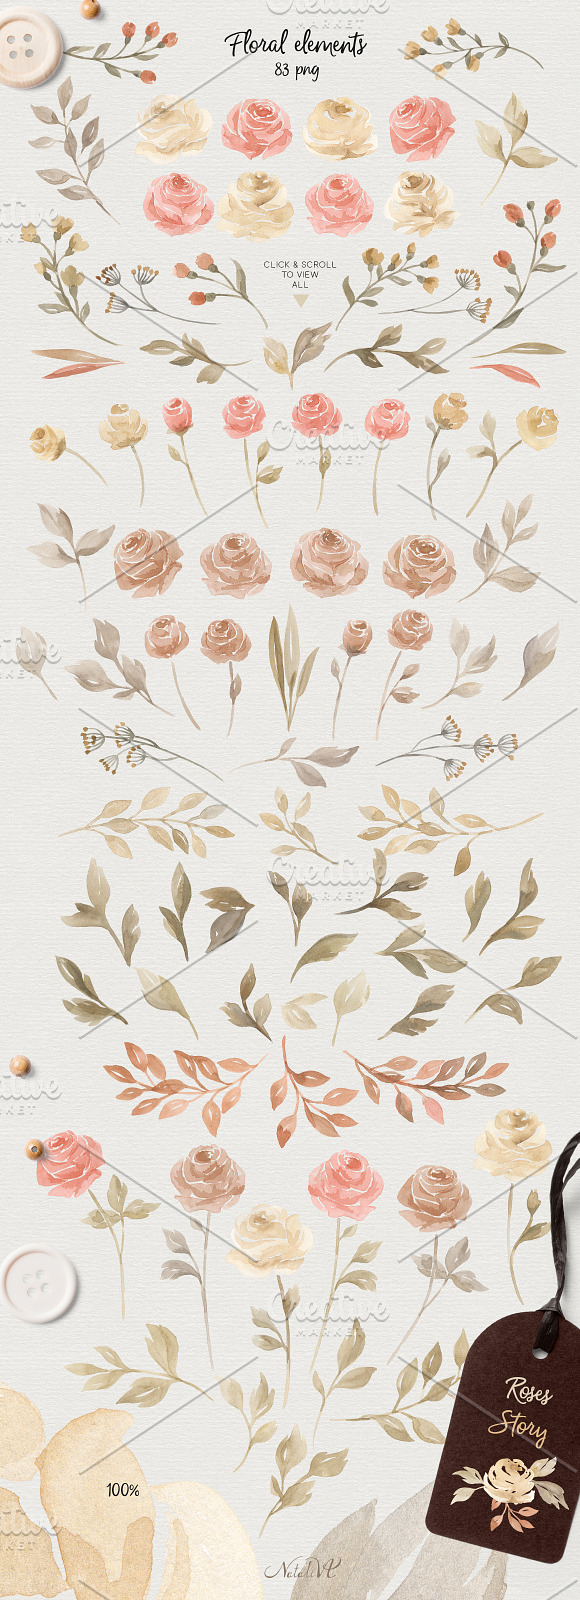 Roses Story. Design Kit Watercolor in Illustrations - product preview 1